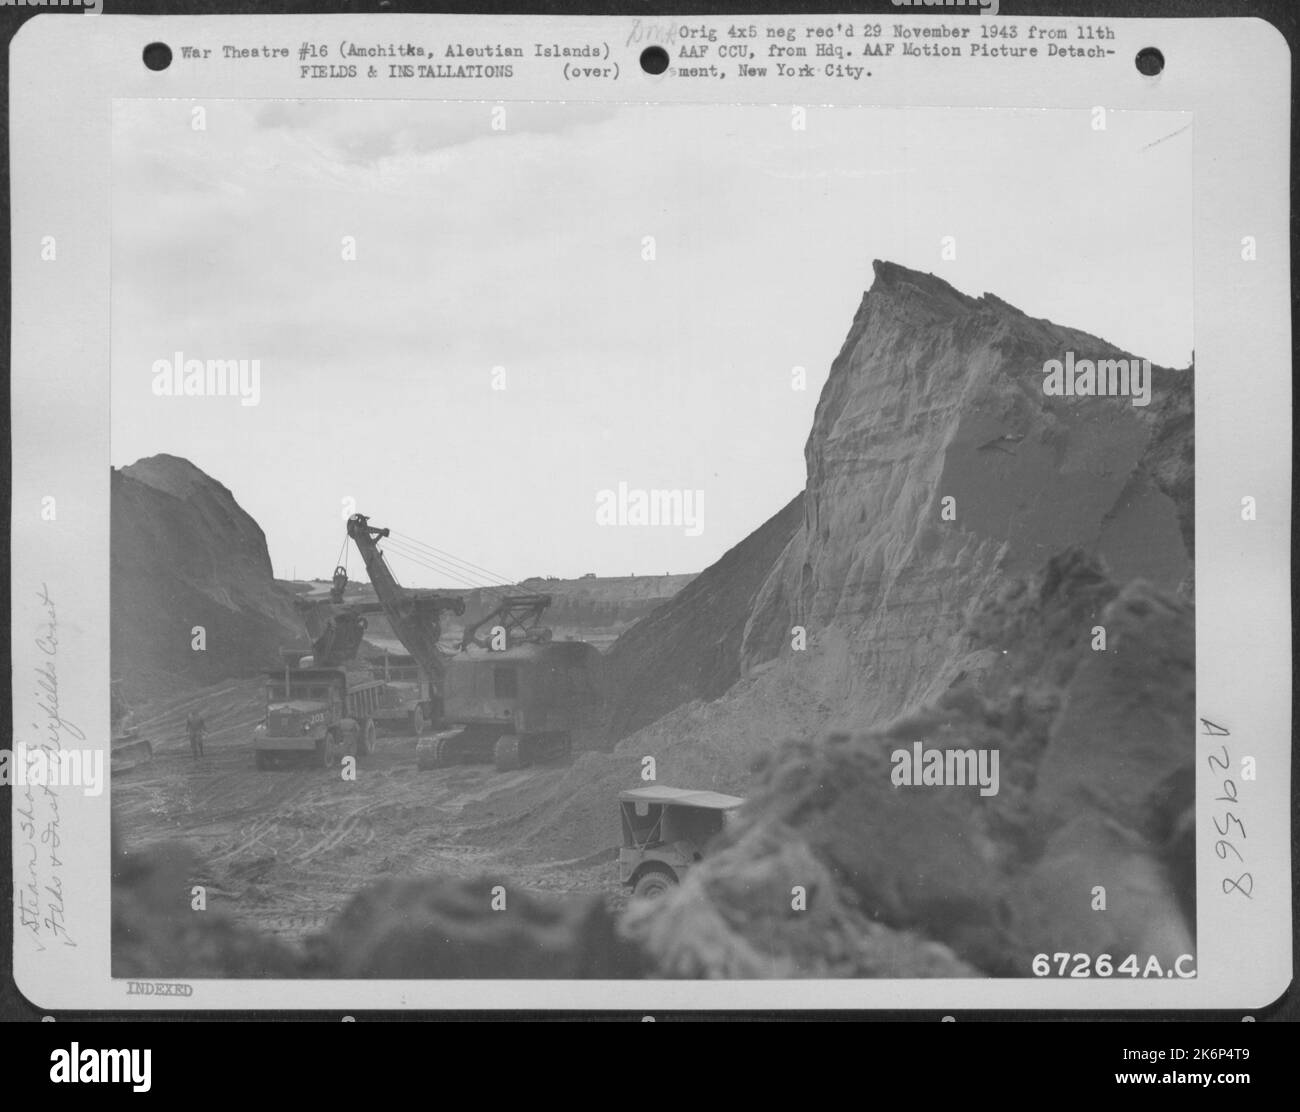 In preparation for enlarging a fighter strip at an 11th Air Force base near Amchitka, Aleutian Islands, a steam shovel is used for the excavation. 12 October 1943. Stock Photo